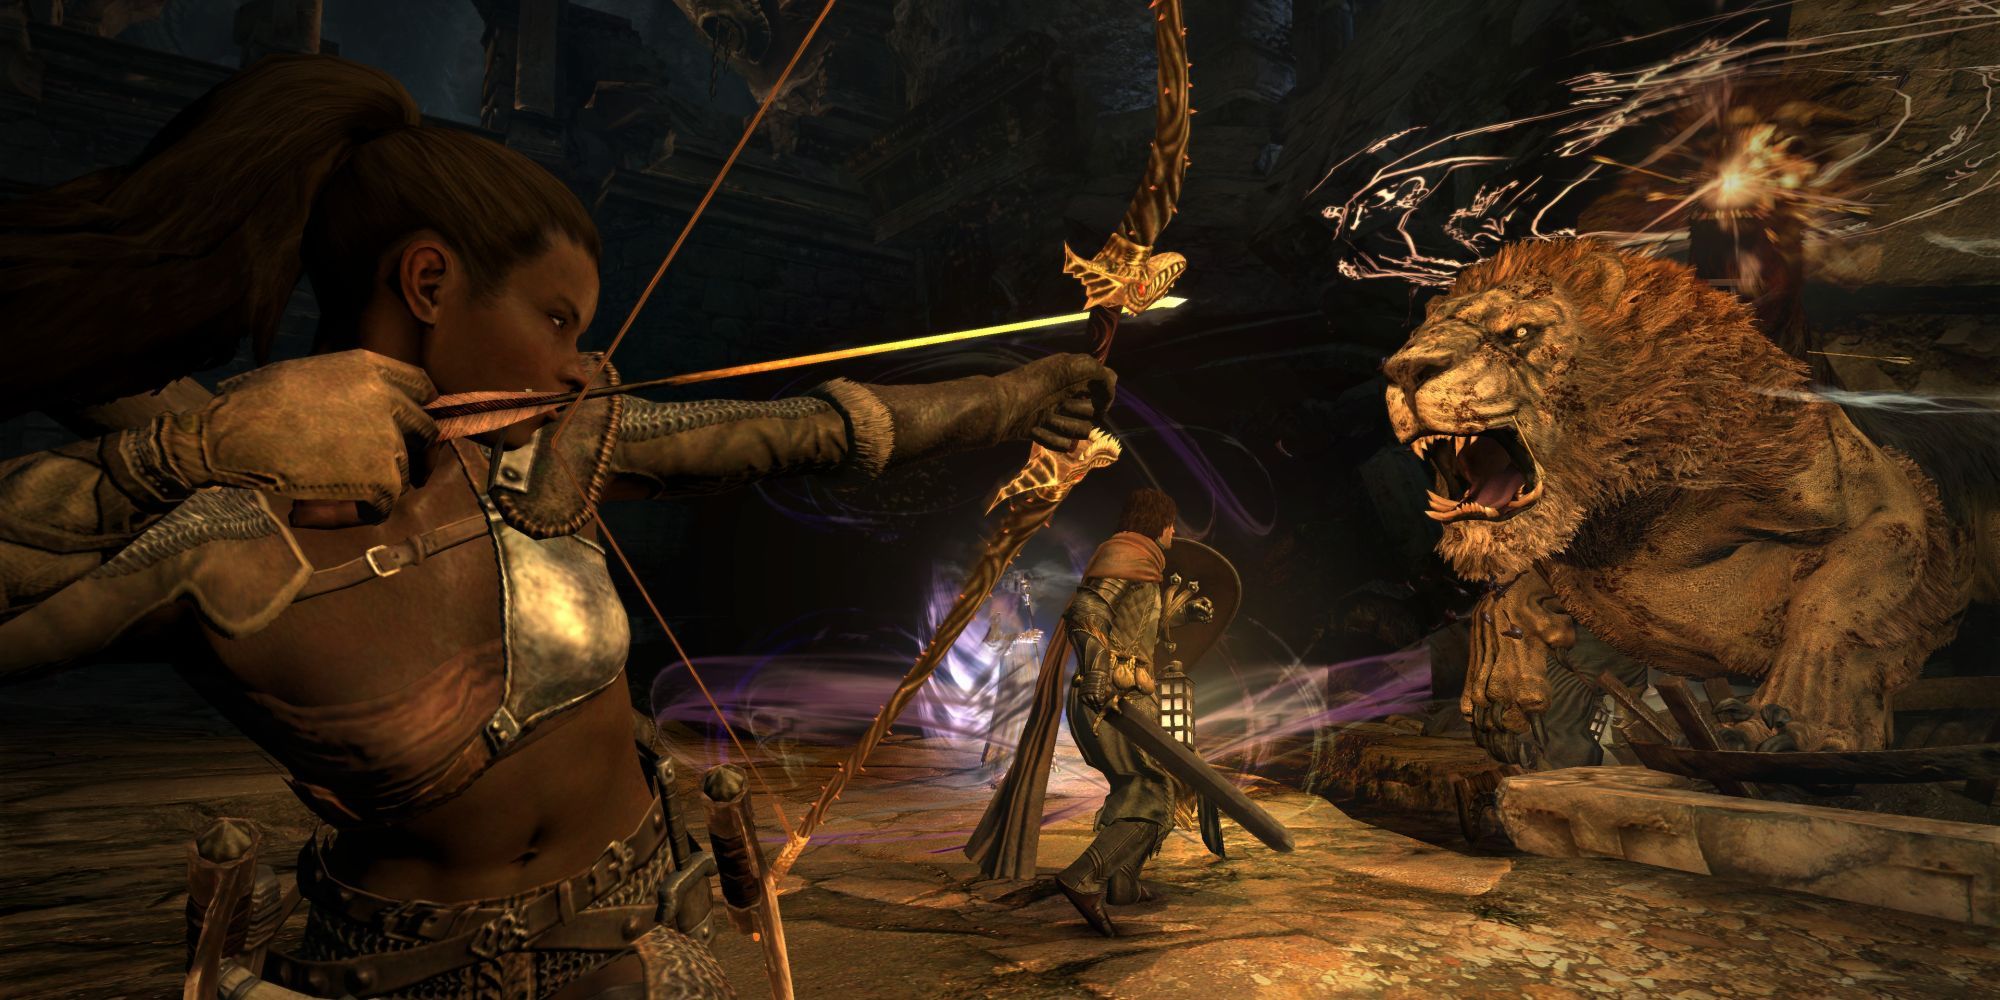 Combat between a player character, pawns, and a monster in Dragon's Dogma: Dark Arisen